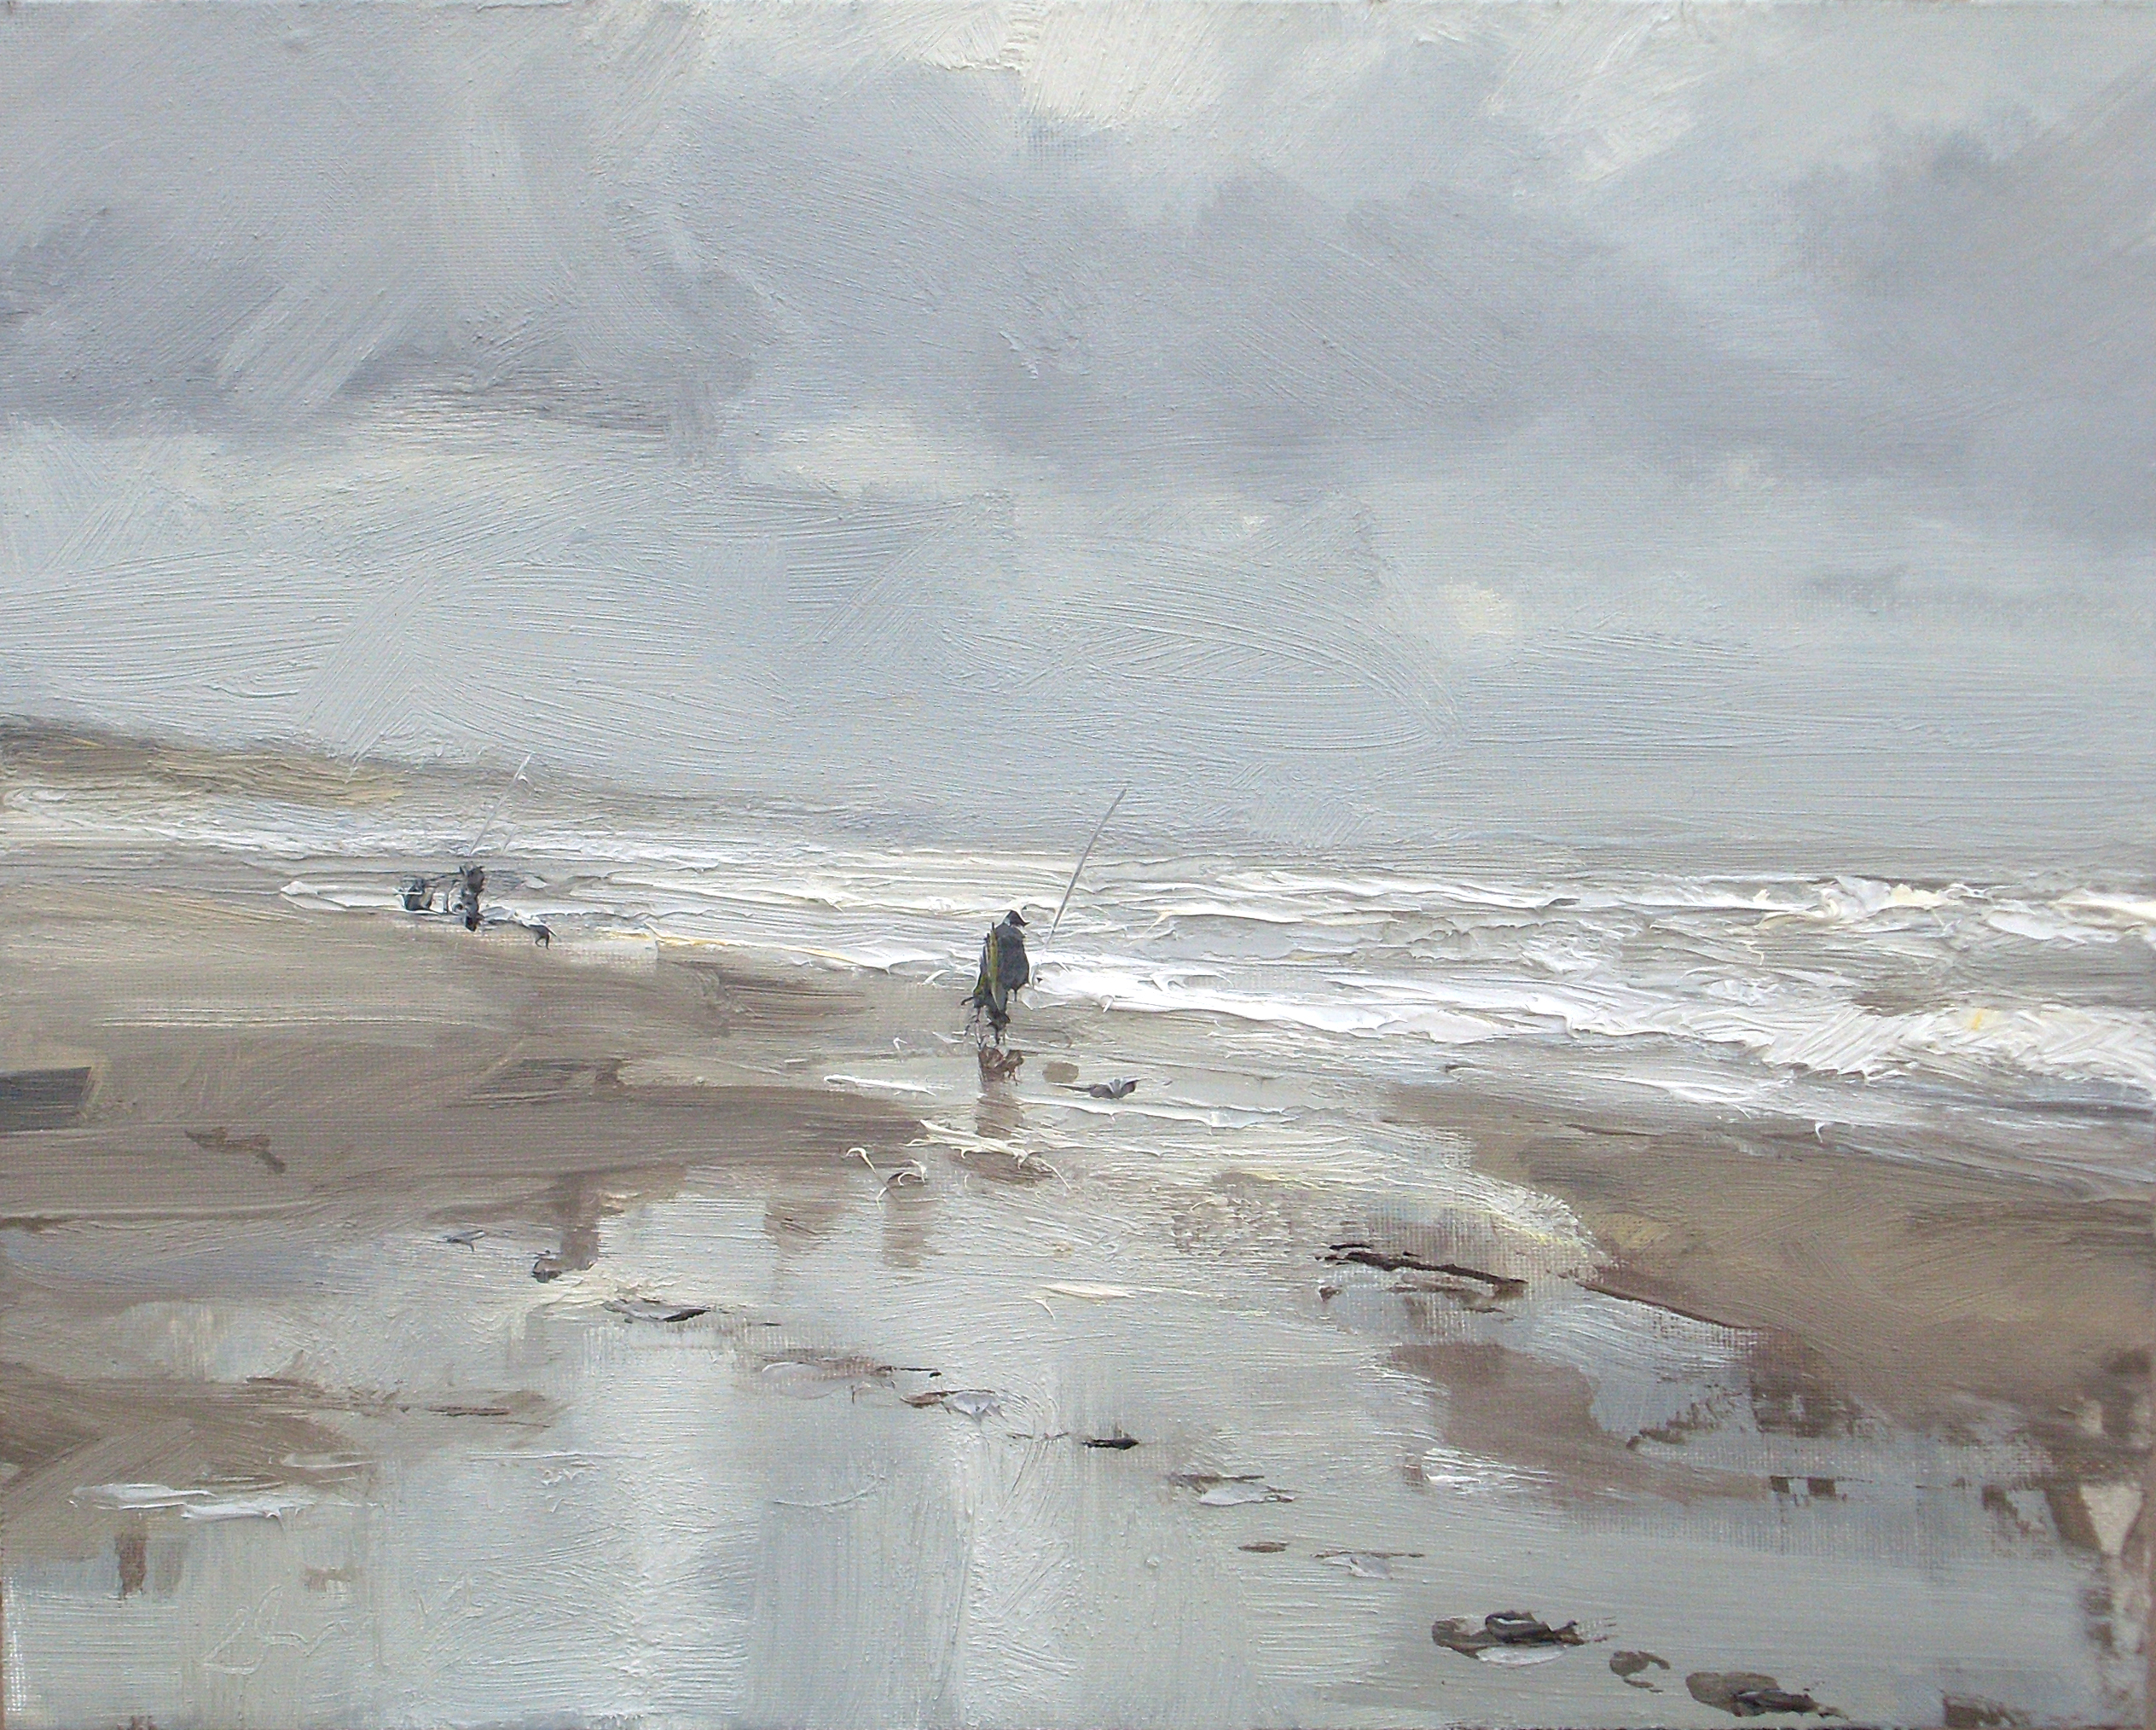 Roos Schuring, "Beautiful Grey Day – Fishermen," 24 x 30 cm, Oil on canvas panel